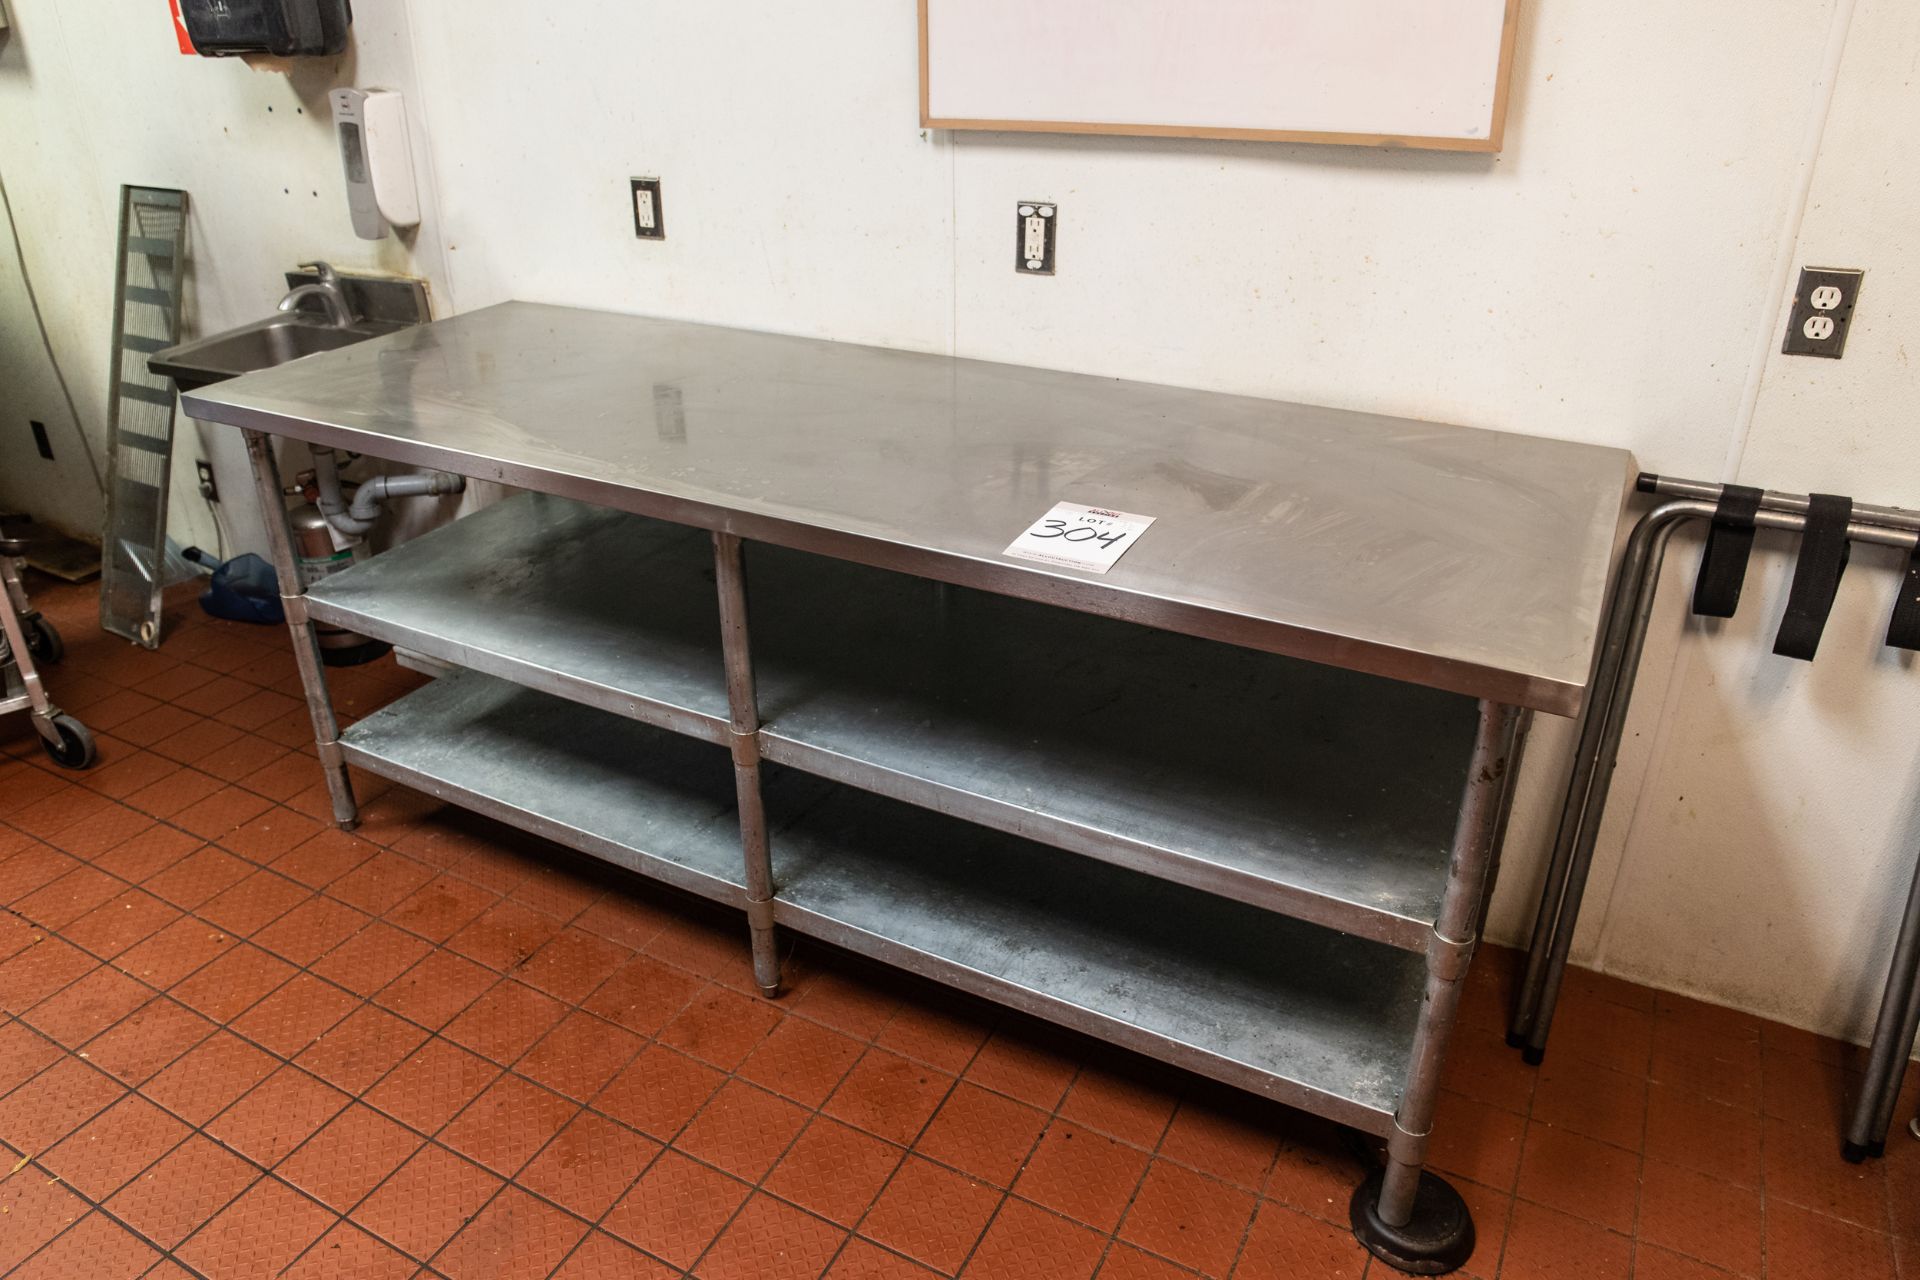 2 SHELVE PREP TABLE WITH S.S TOP H 35"- D- 30" L-84"